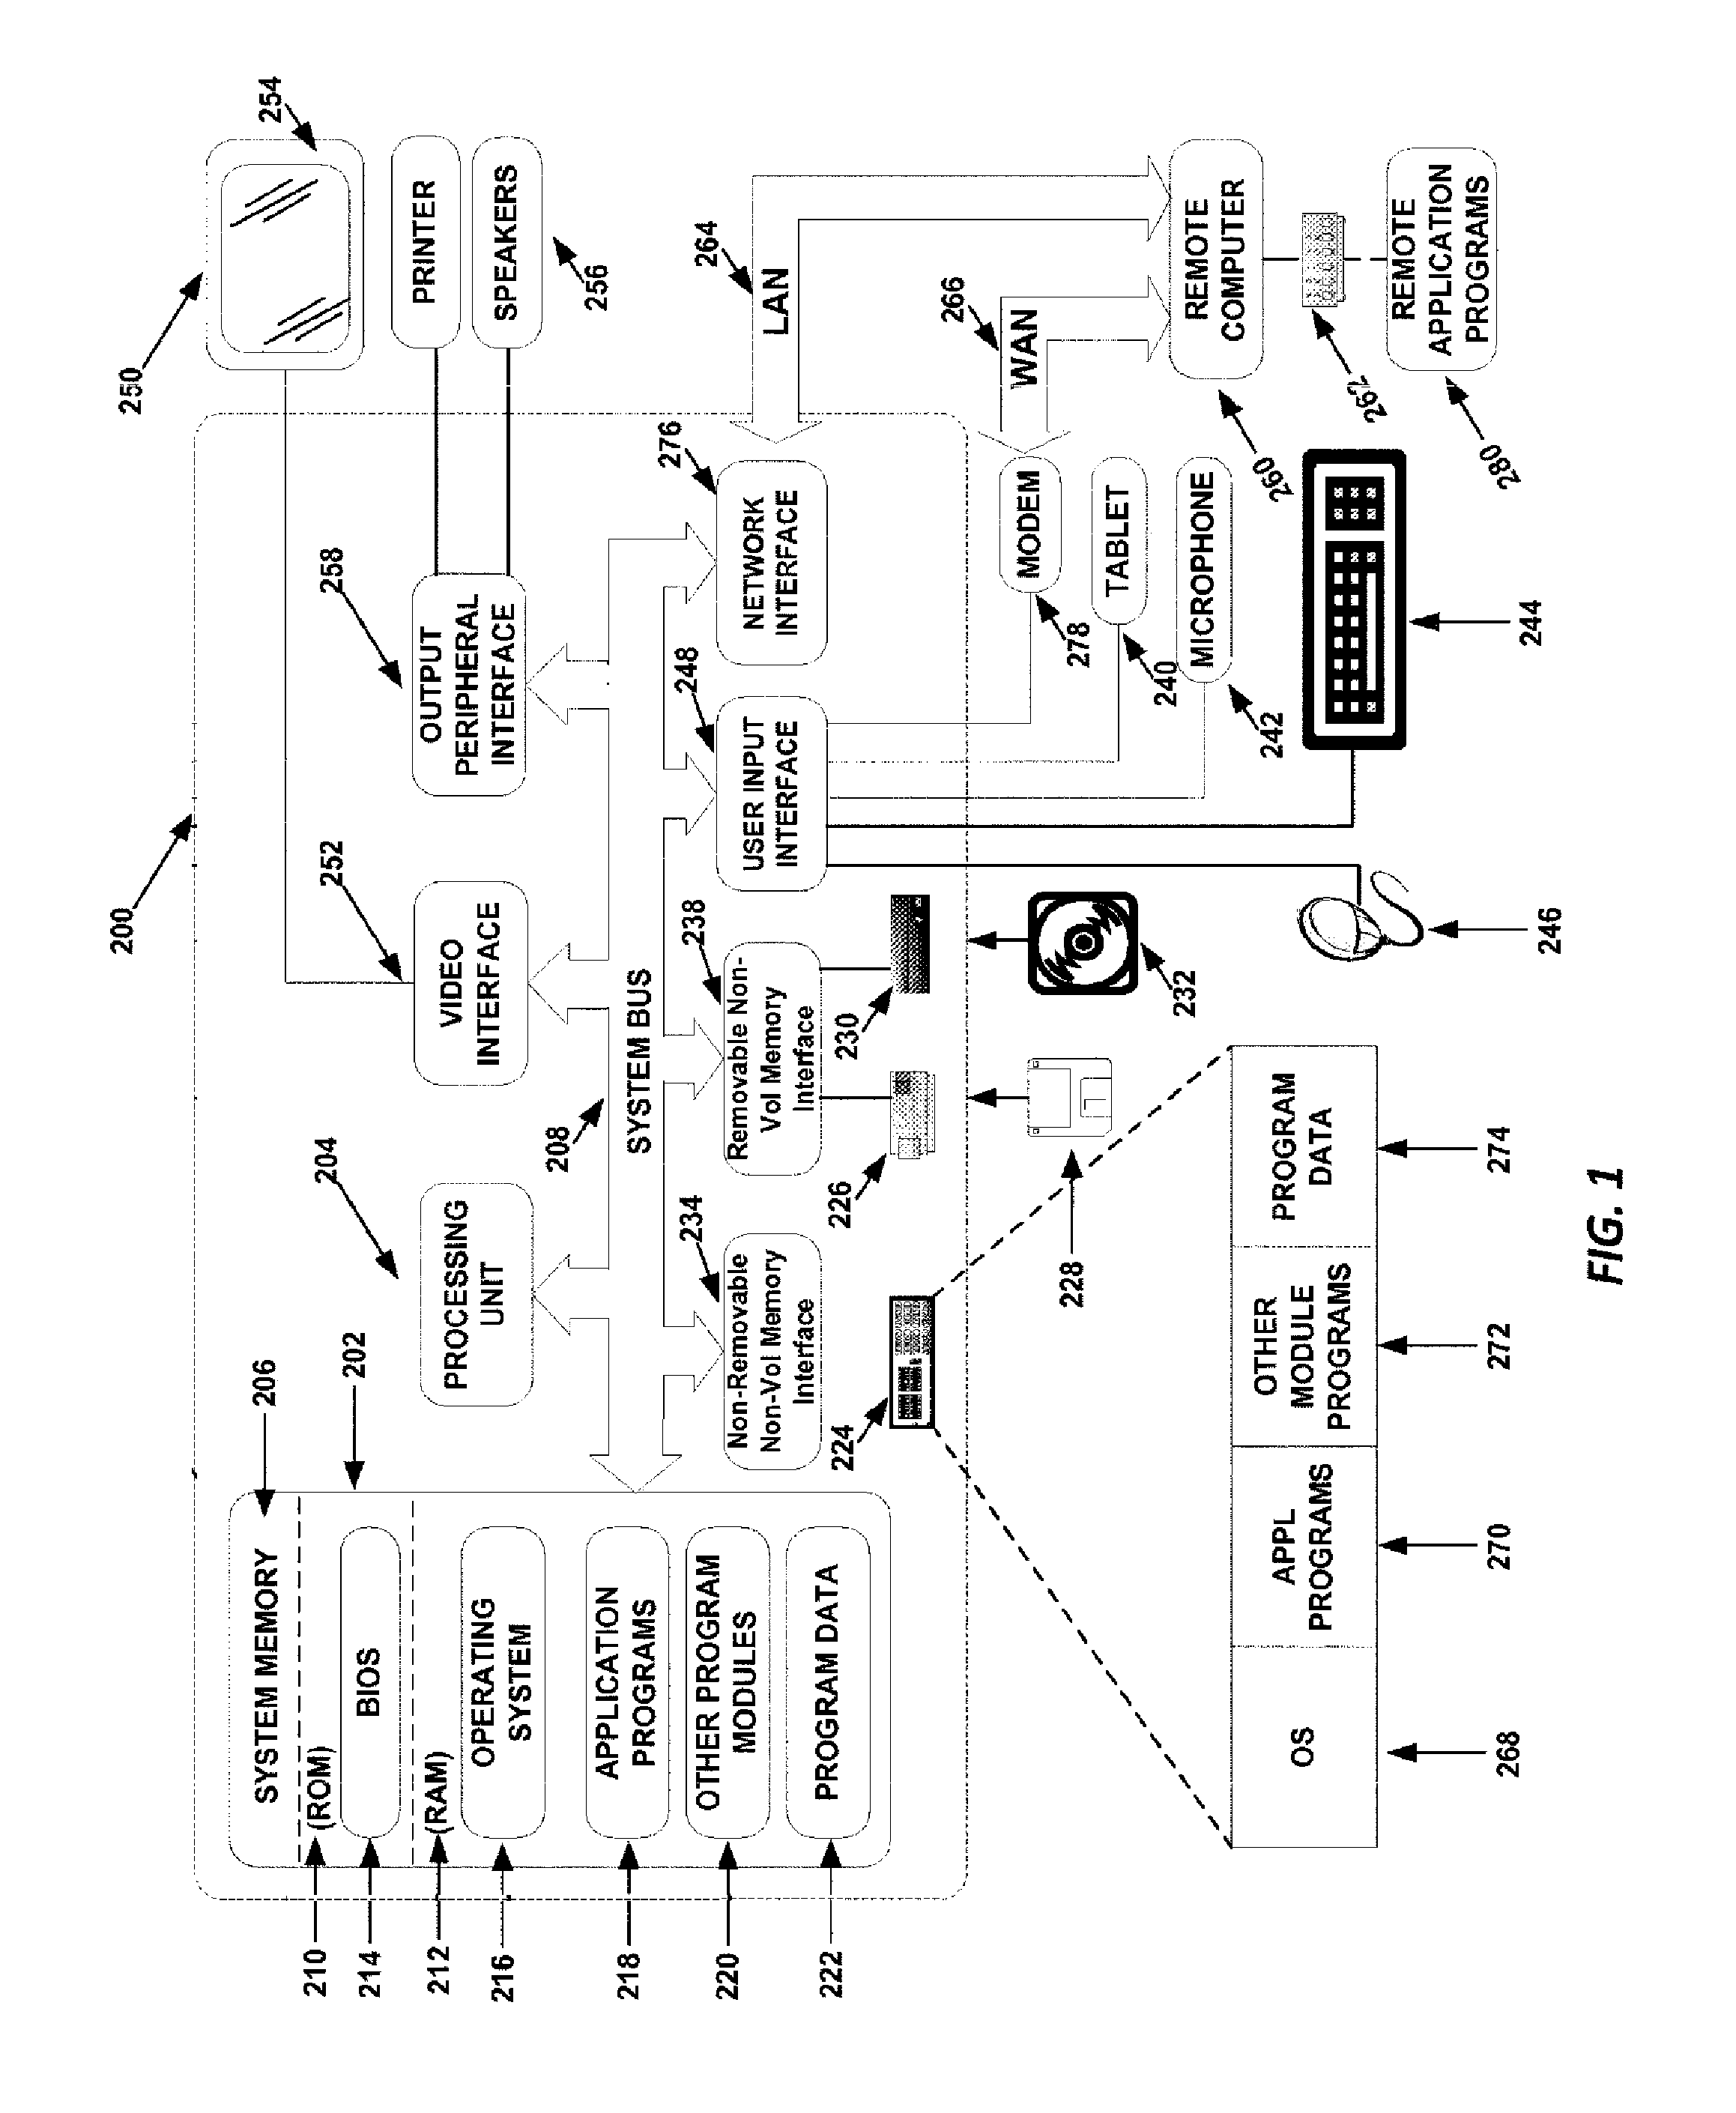 Method, system and storage device for an embedded command driven interface within a graphical user interface